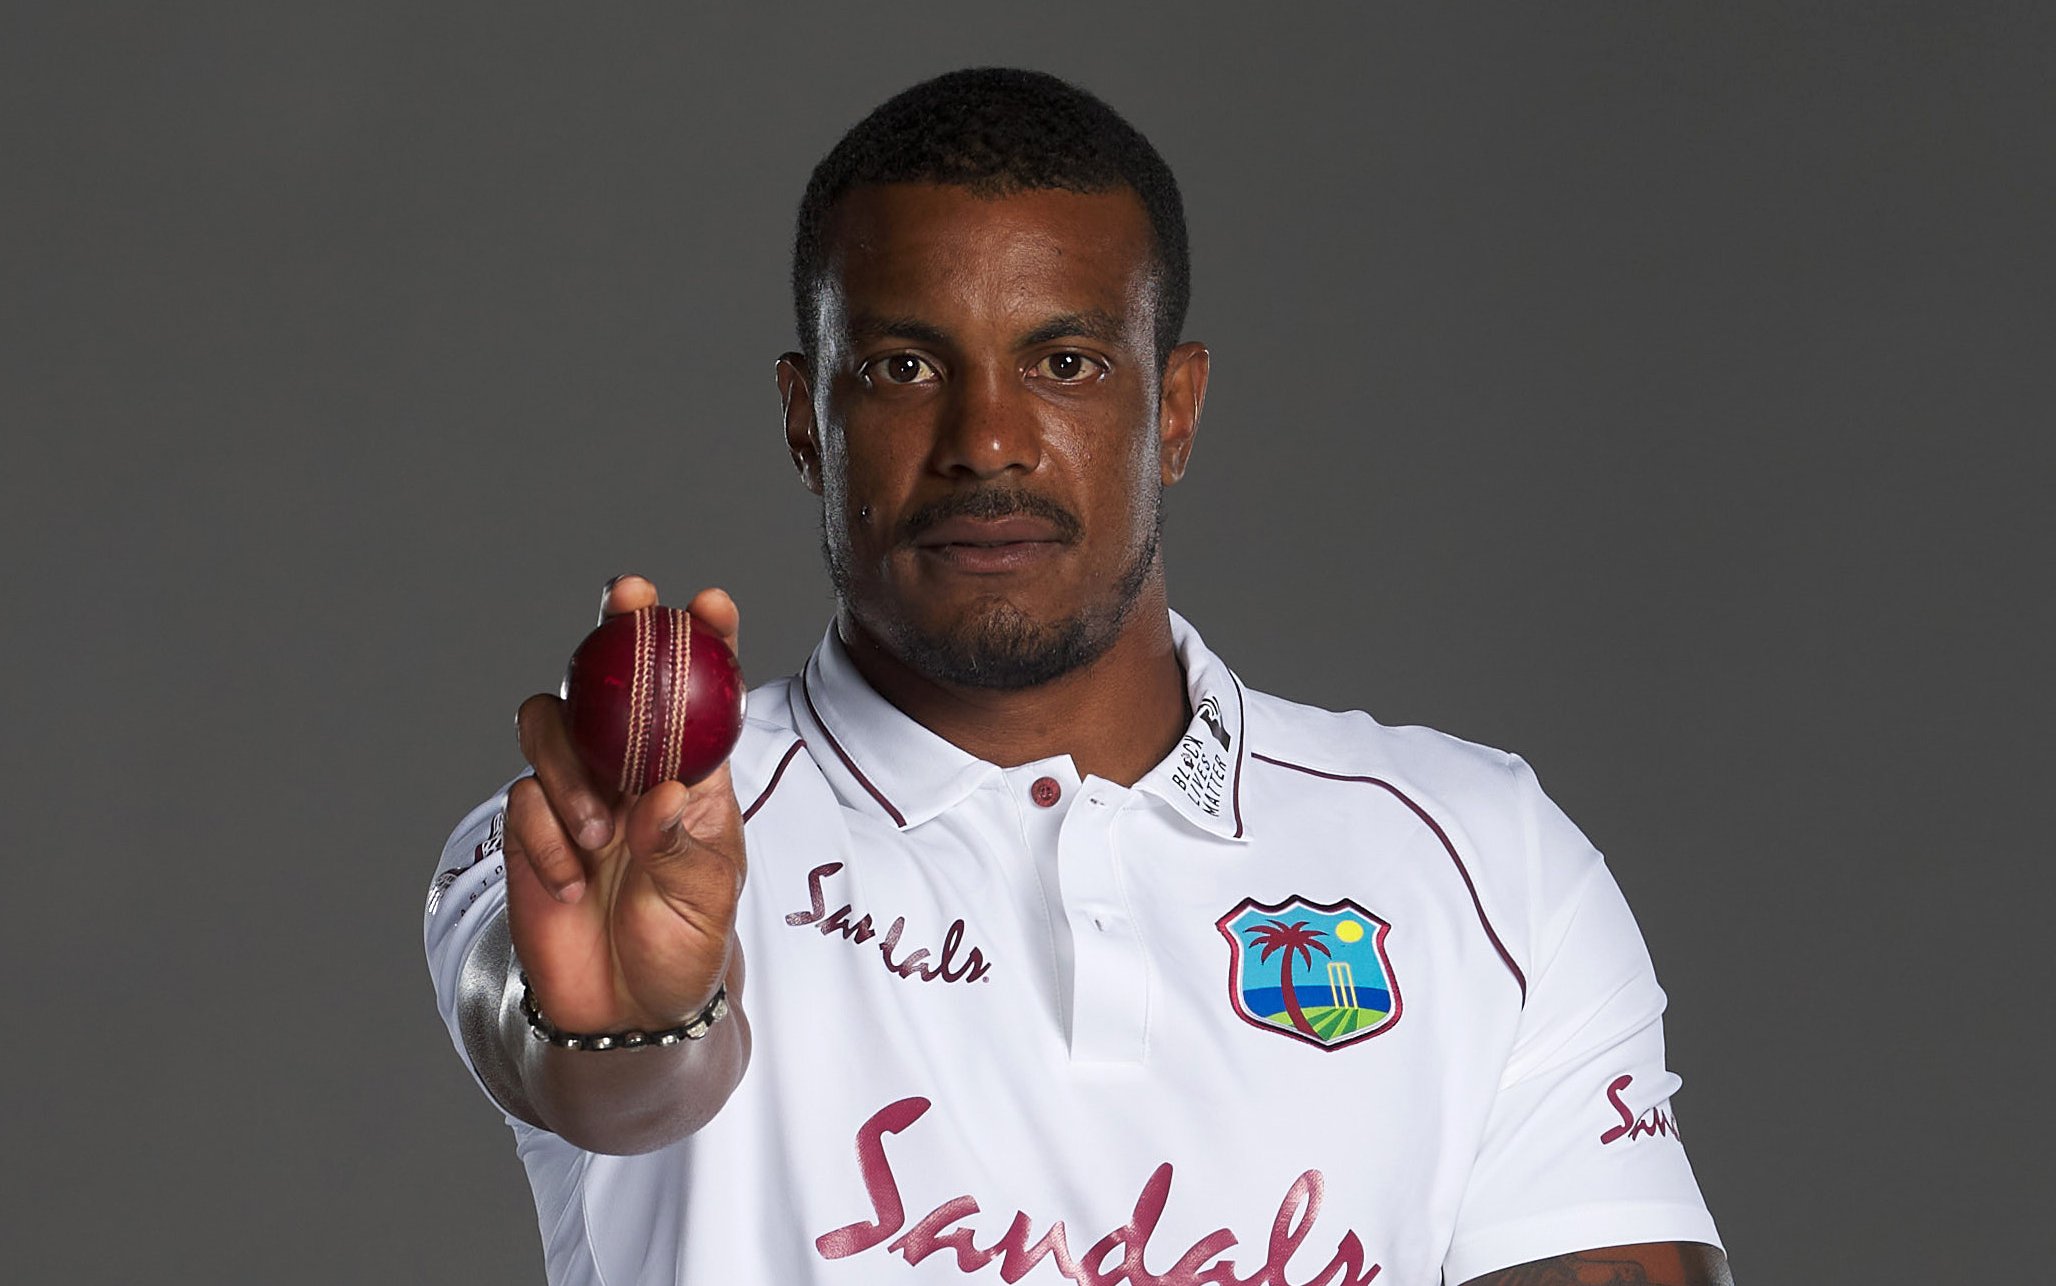 West Indies pick uncapped Jeremy Solozano for Sri Lanka Tests, Shannon Gabriel recalled